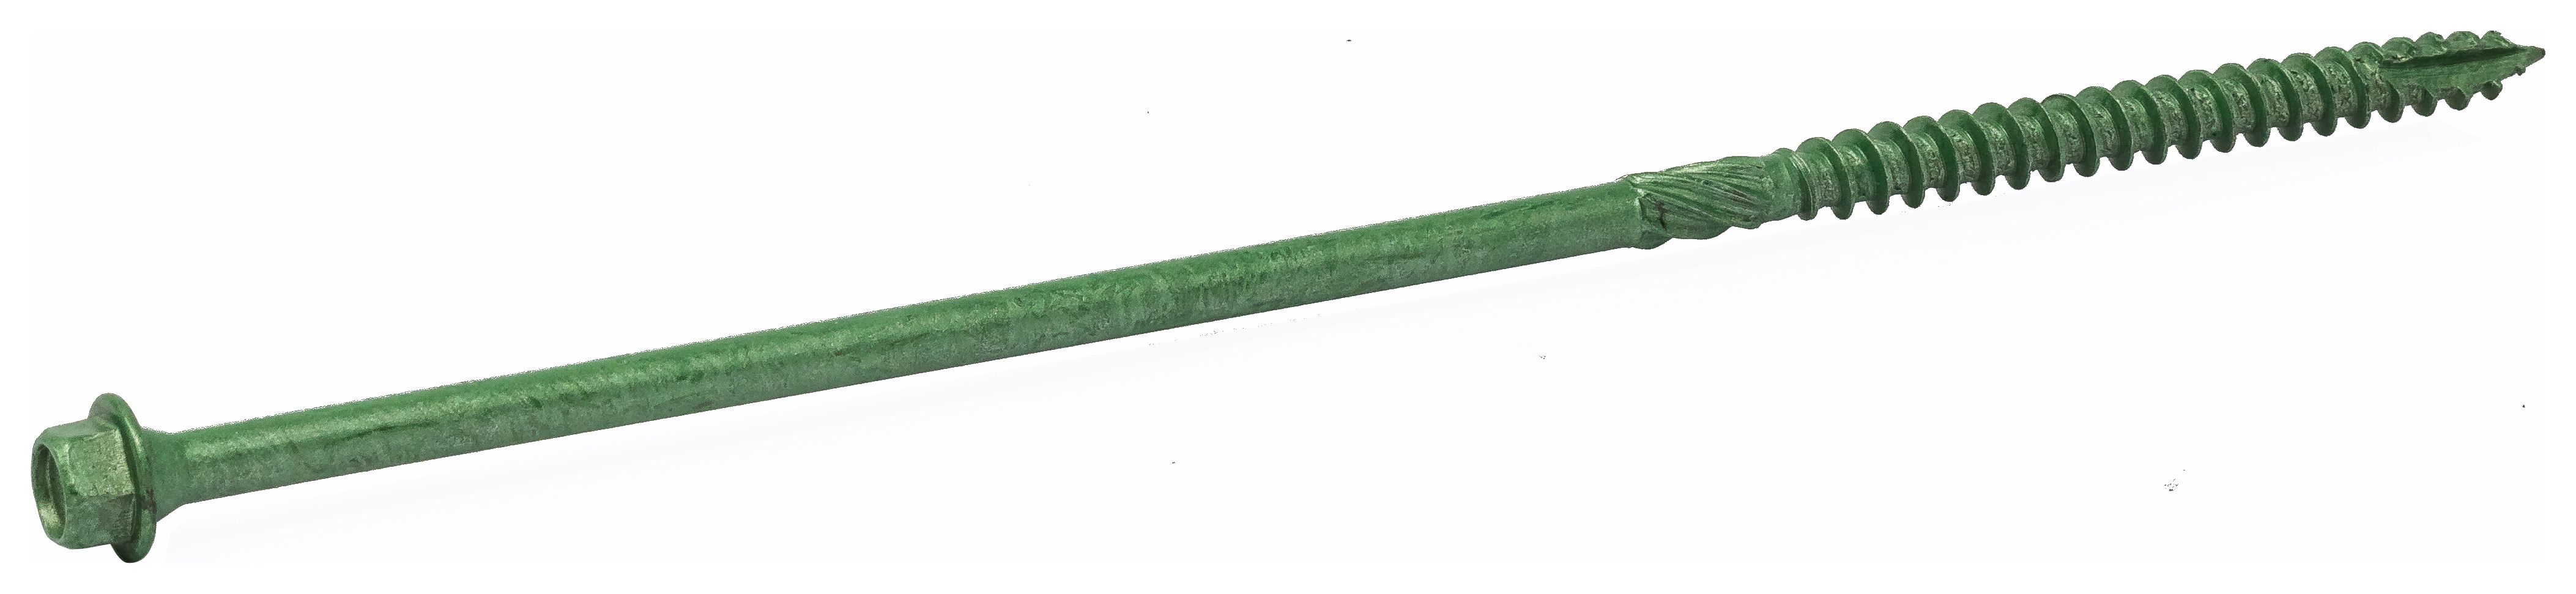 Wickes Timber Drive Hex Head Green Screw - 7x100mm Pack Of 50